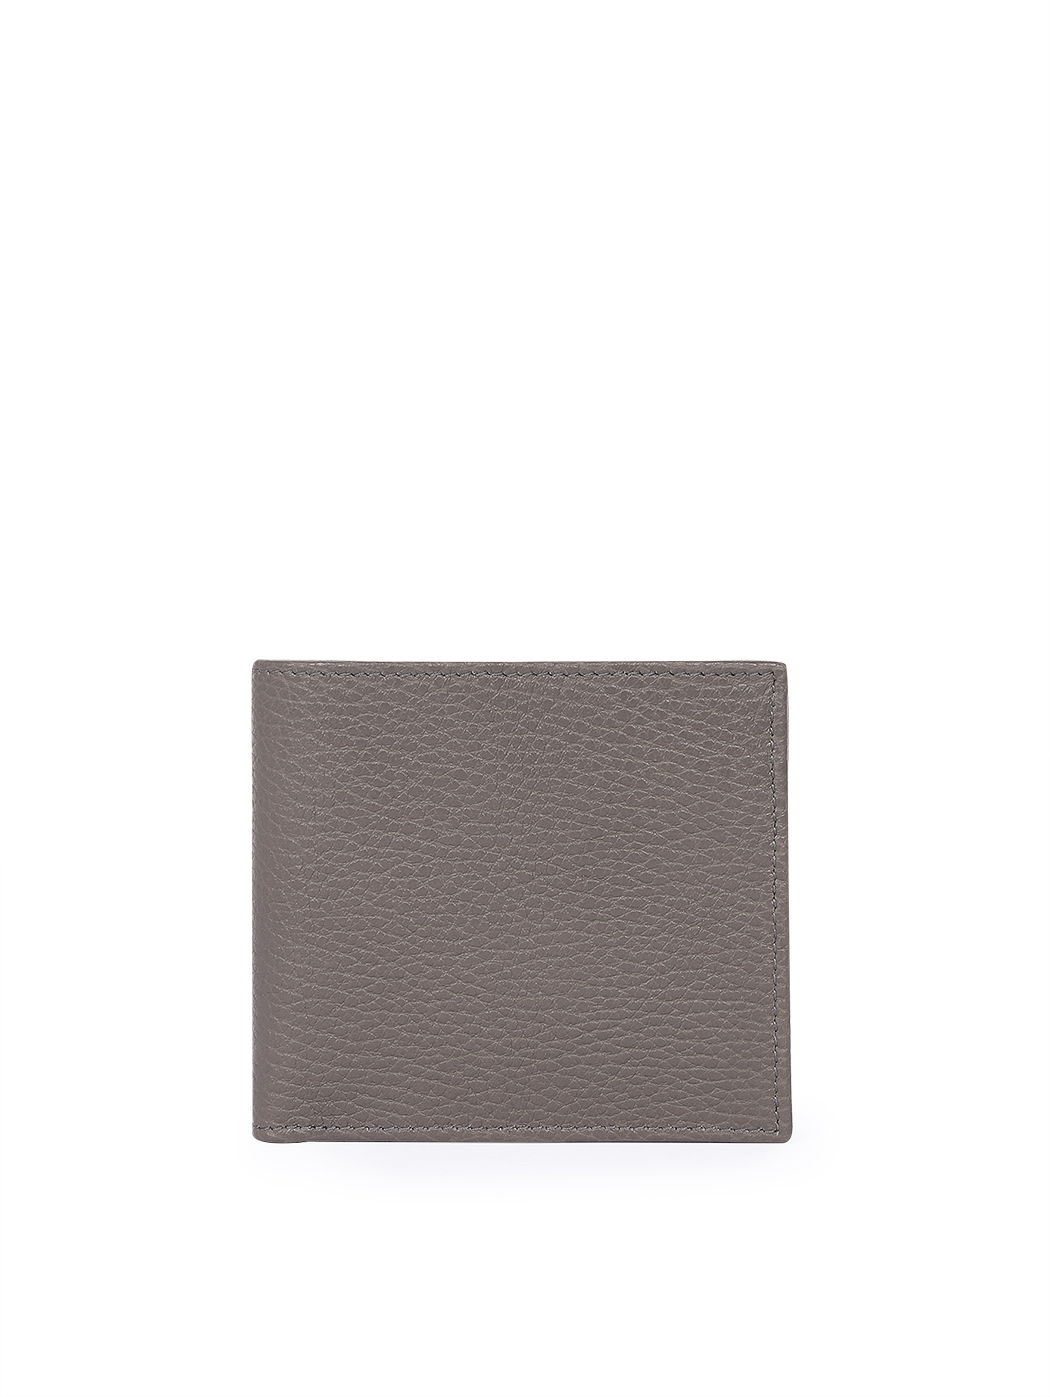 Pebble Leather Billfold Coin Pocket Wallet Grey